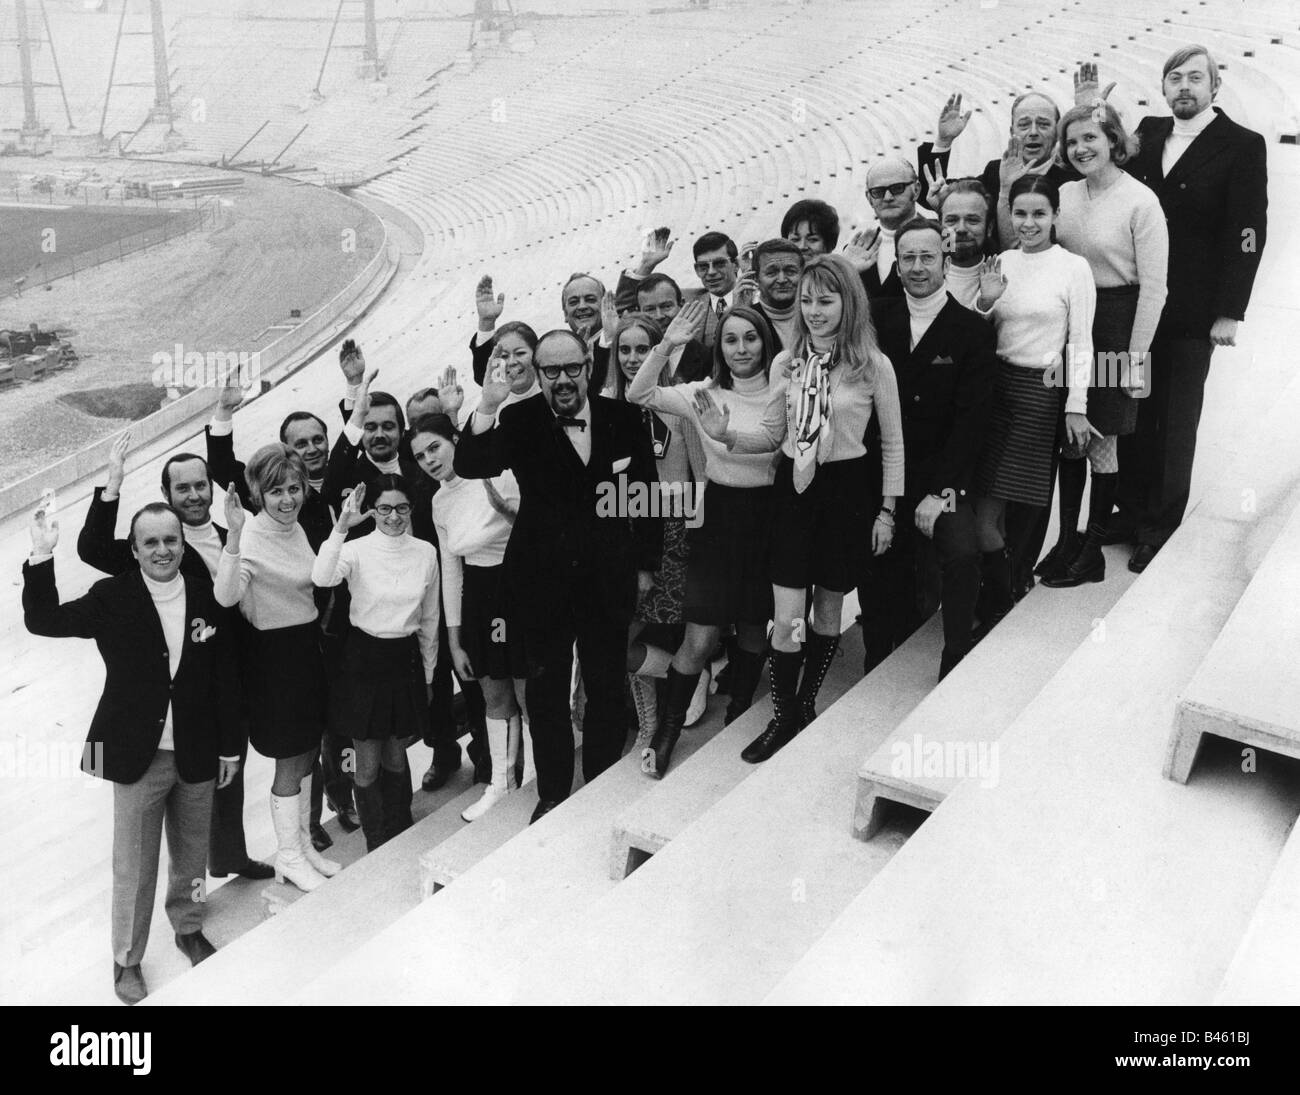 Klein, Hans 'Johnny', 11.7.1931 - 26.11.1996, German politician and journalist, chief press official of the Munich  Olympic Games 1968 - 1972, with his staff, Olympic Stadium, 1970, , Stock Photo